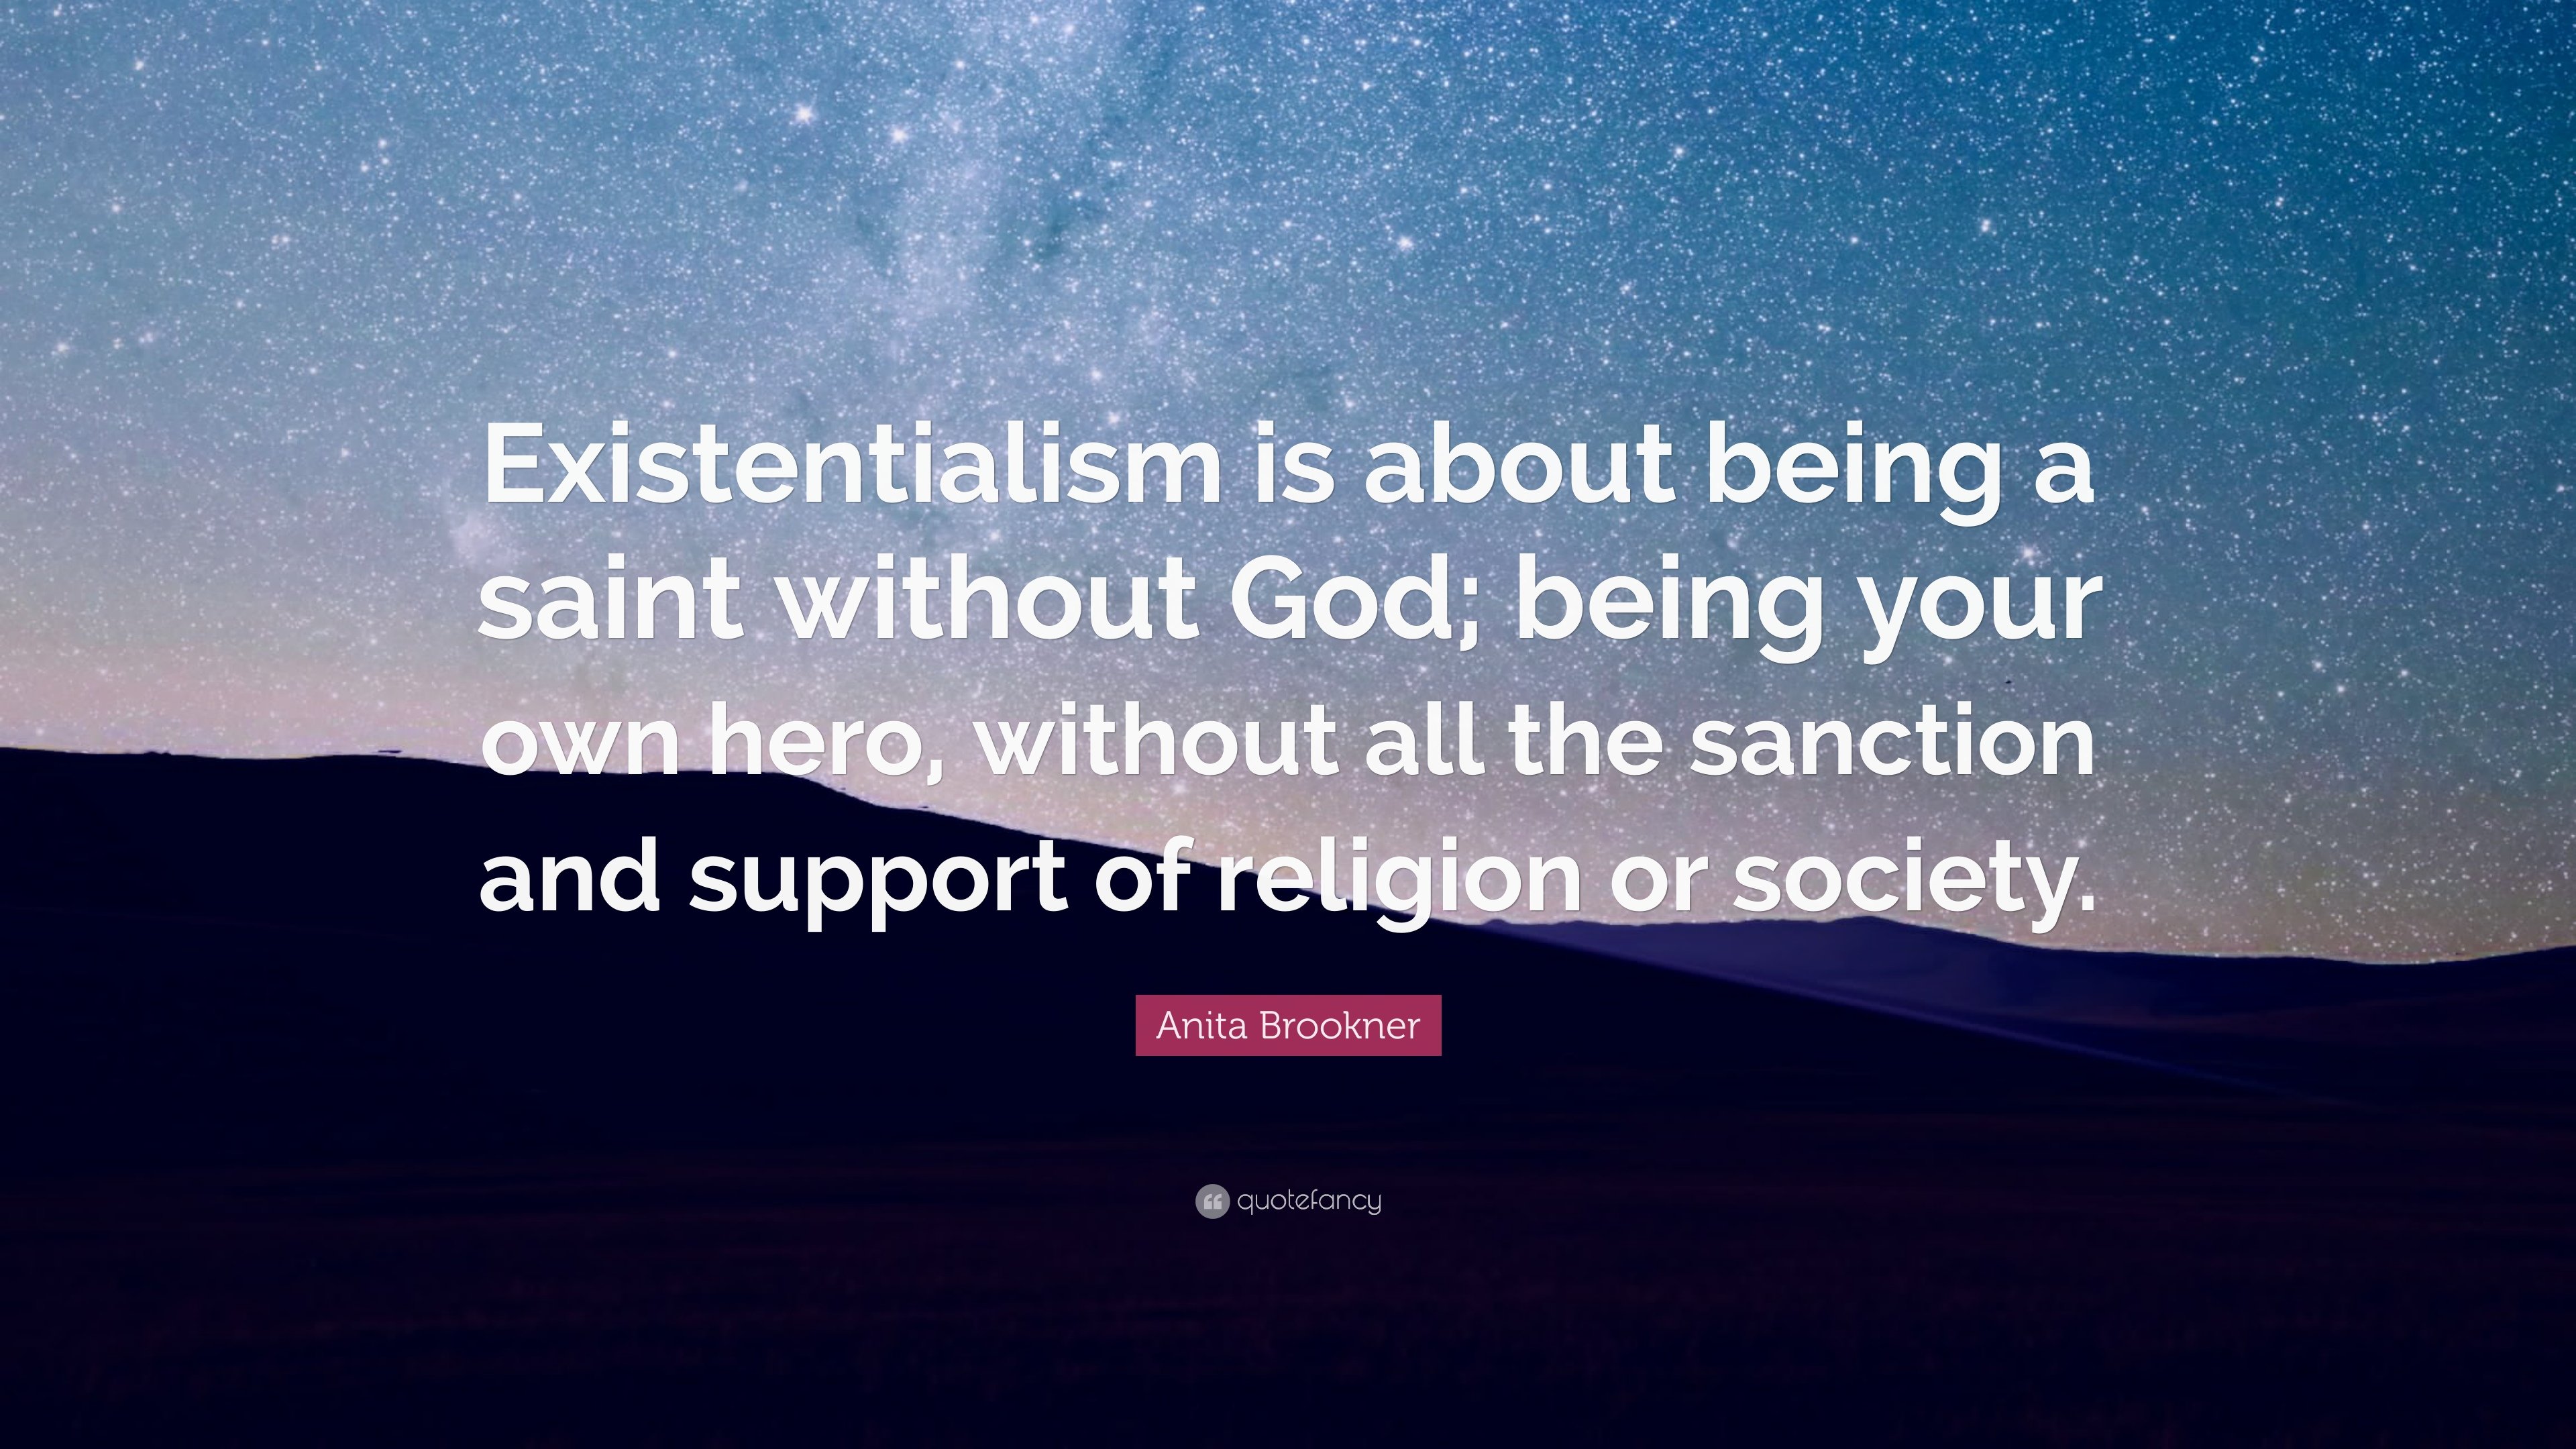 Anita Brookner Quote: “Existentialism is about being a saint without God; being your own hero, without all the sanction and support of religion.”